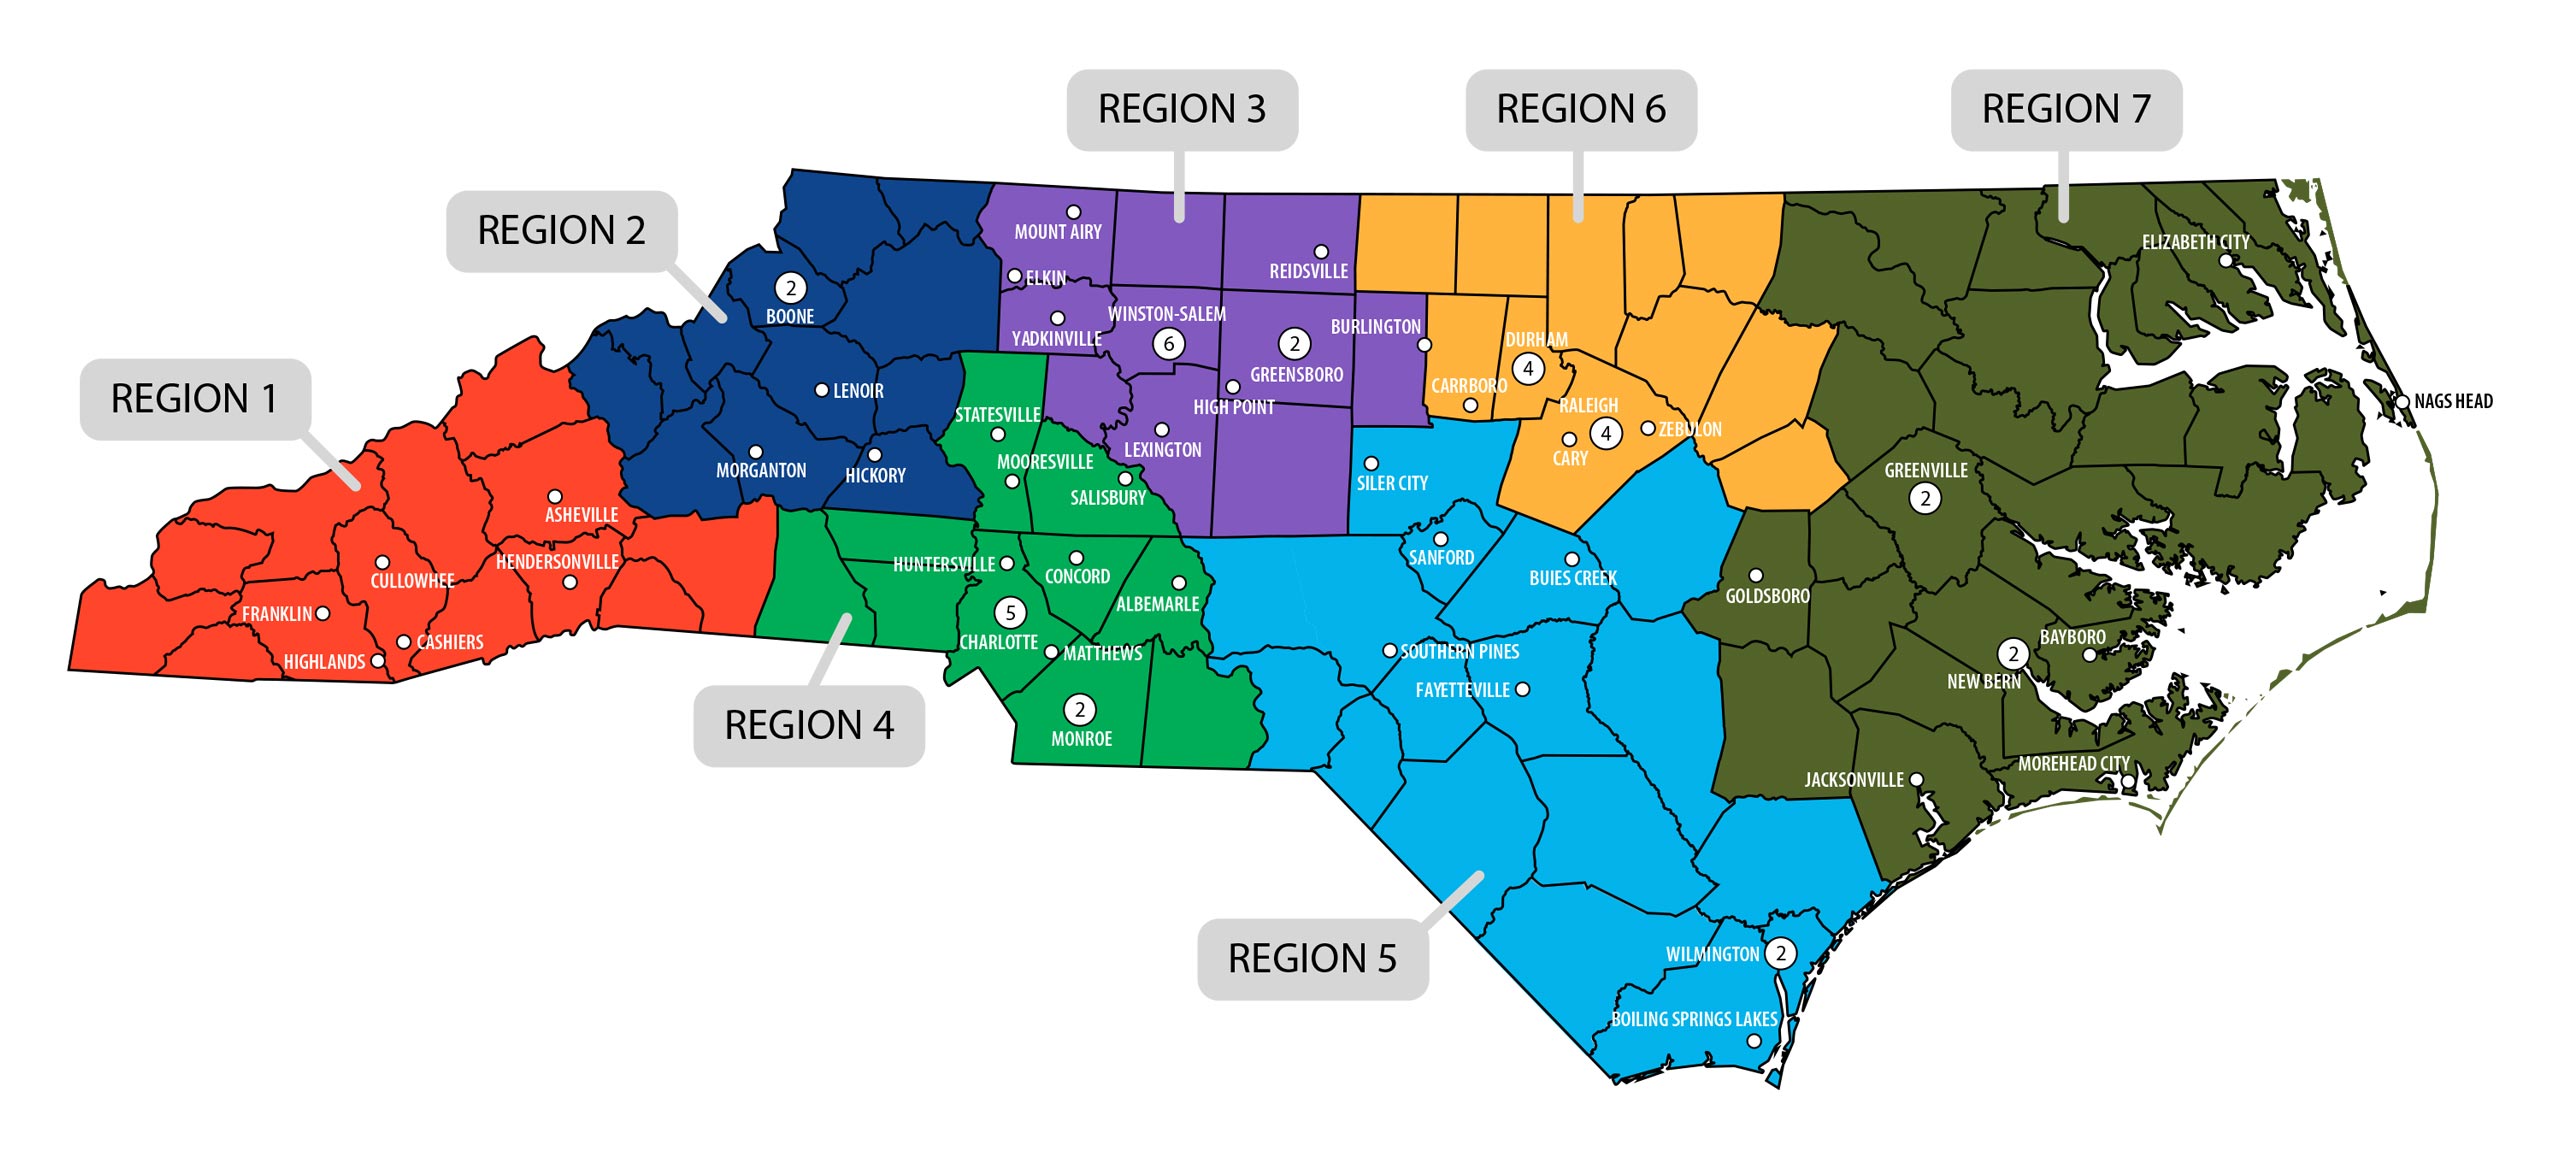 A map of the north carolina region with regions numbered in different colors.